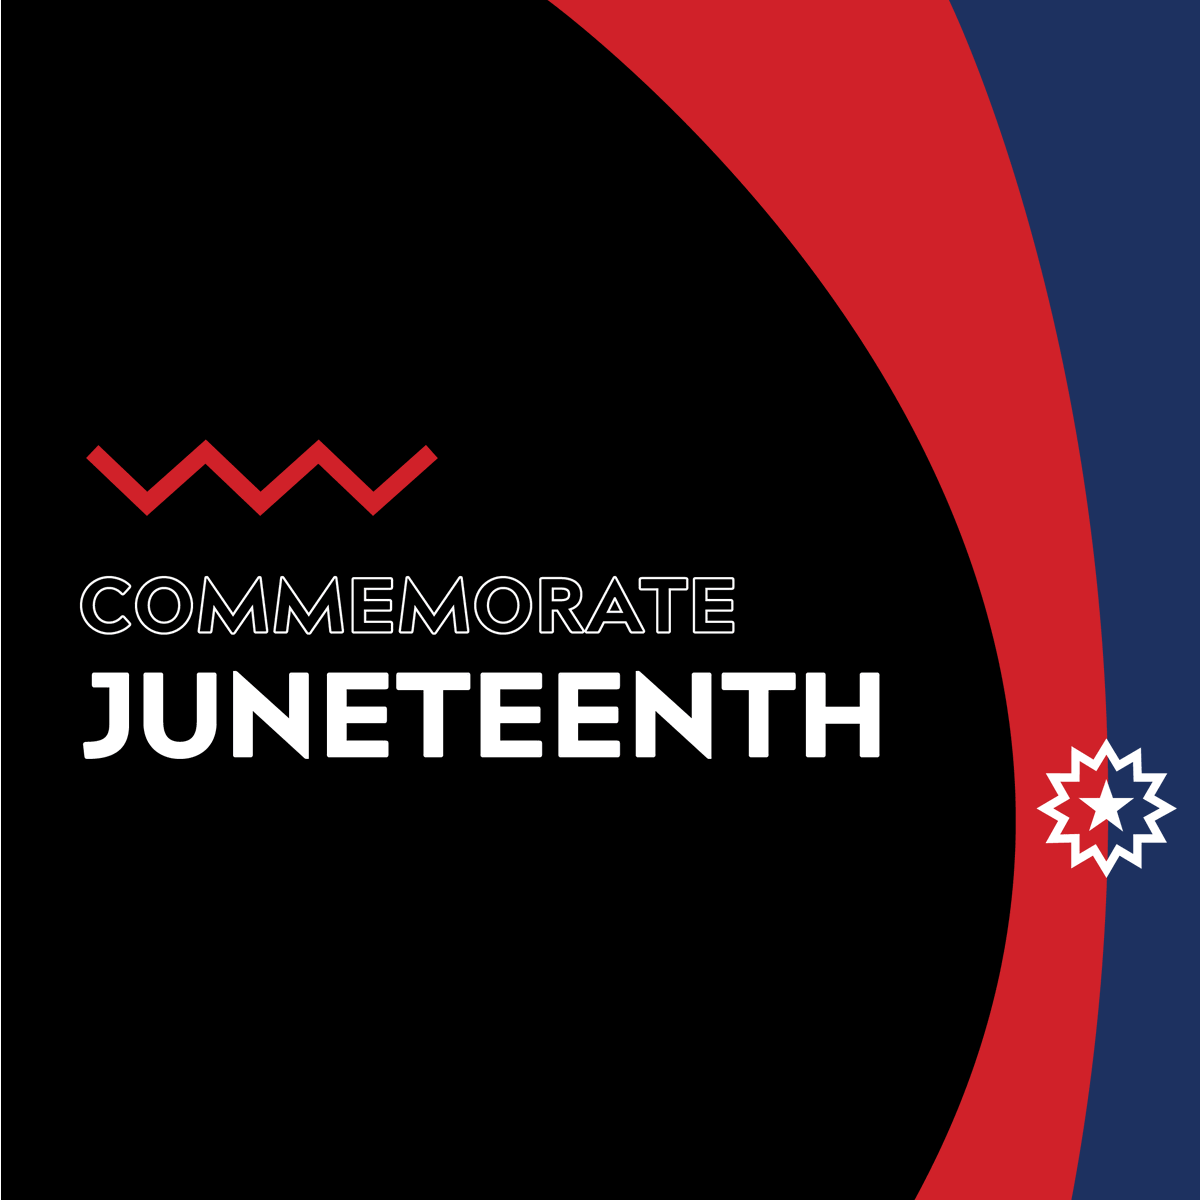 On #Juneteenth and every day, #Hokies are encouraged to reflect on how #VirginiaTech can continue to build a community free of hate, violence, and racism envisioned by our Principles of Community ➡️ fal.cn/3zd7U